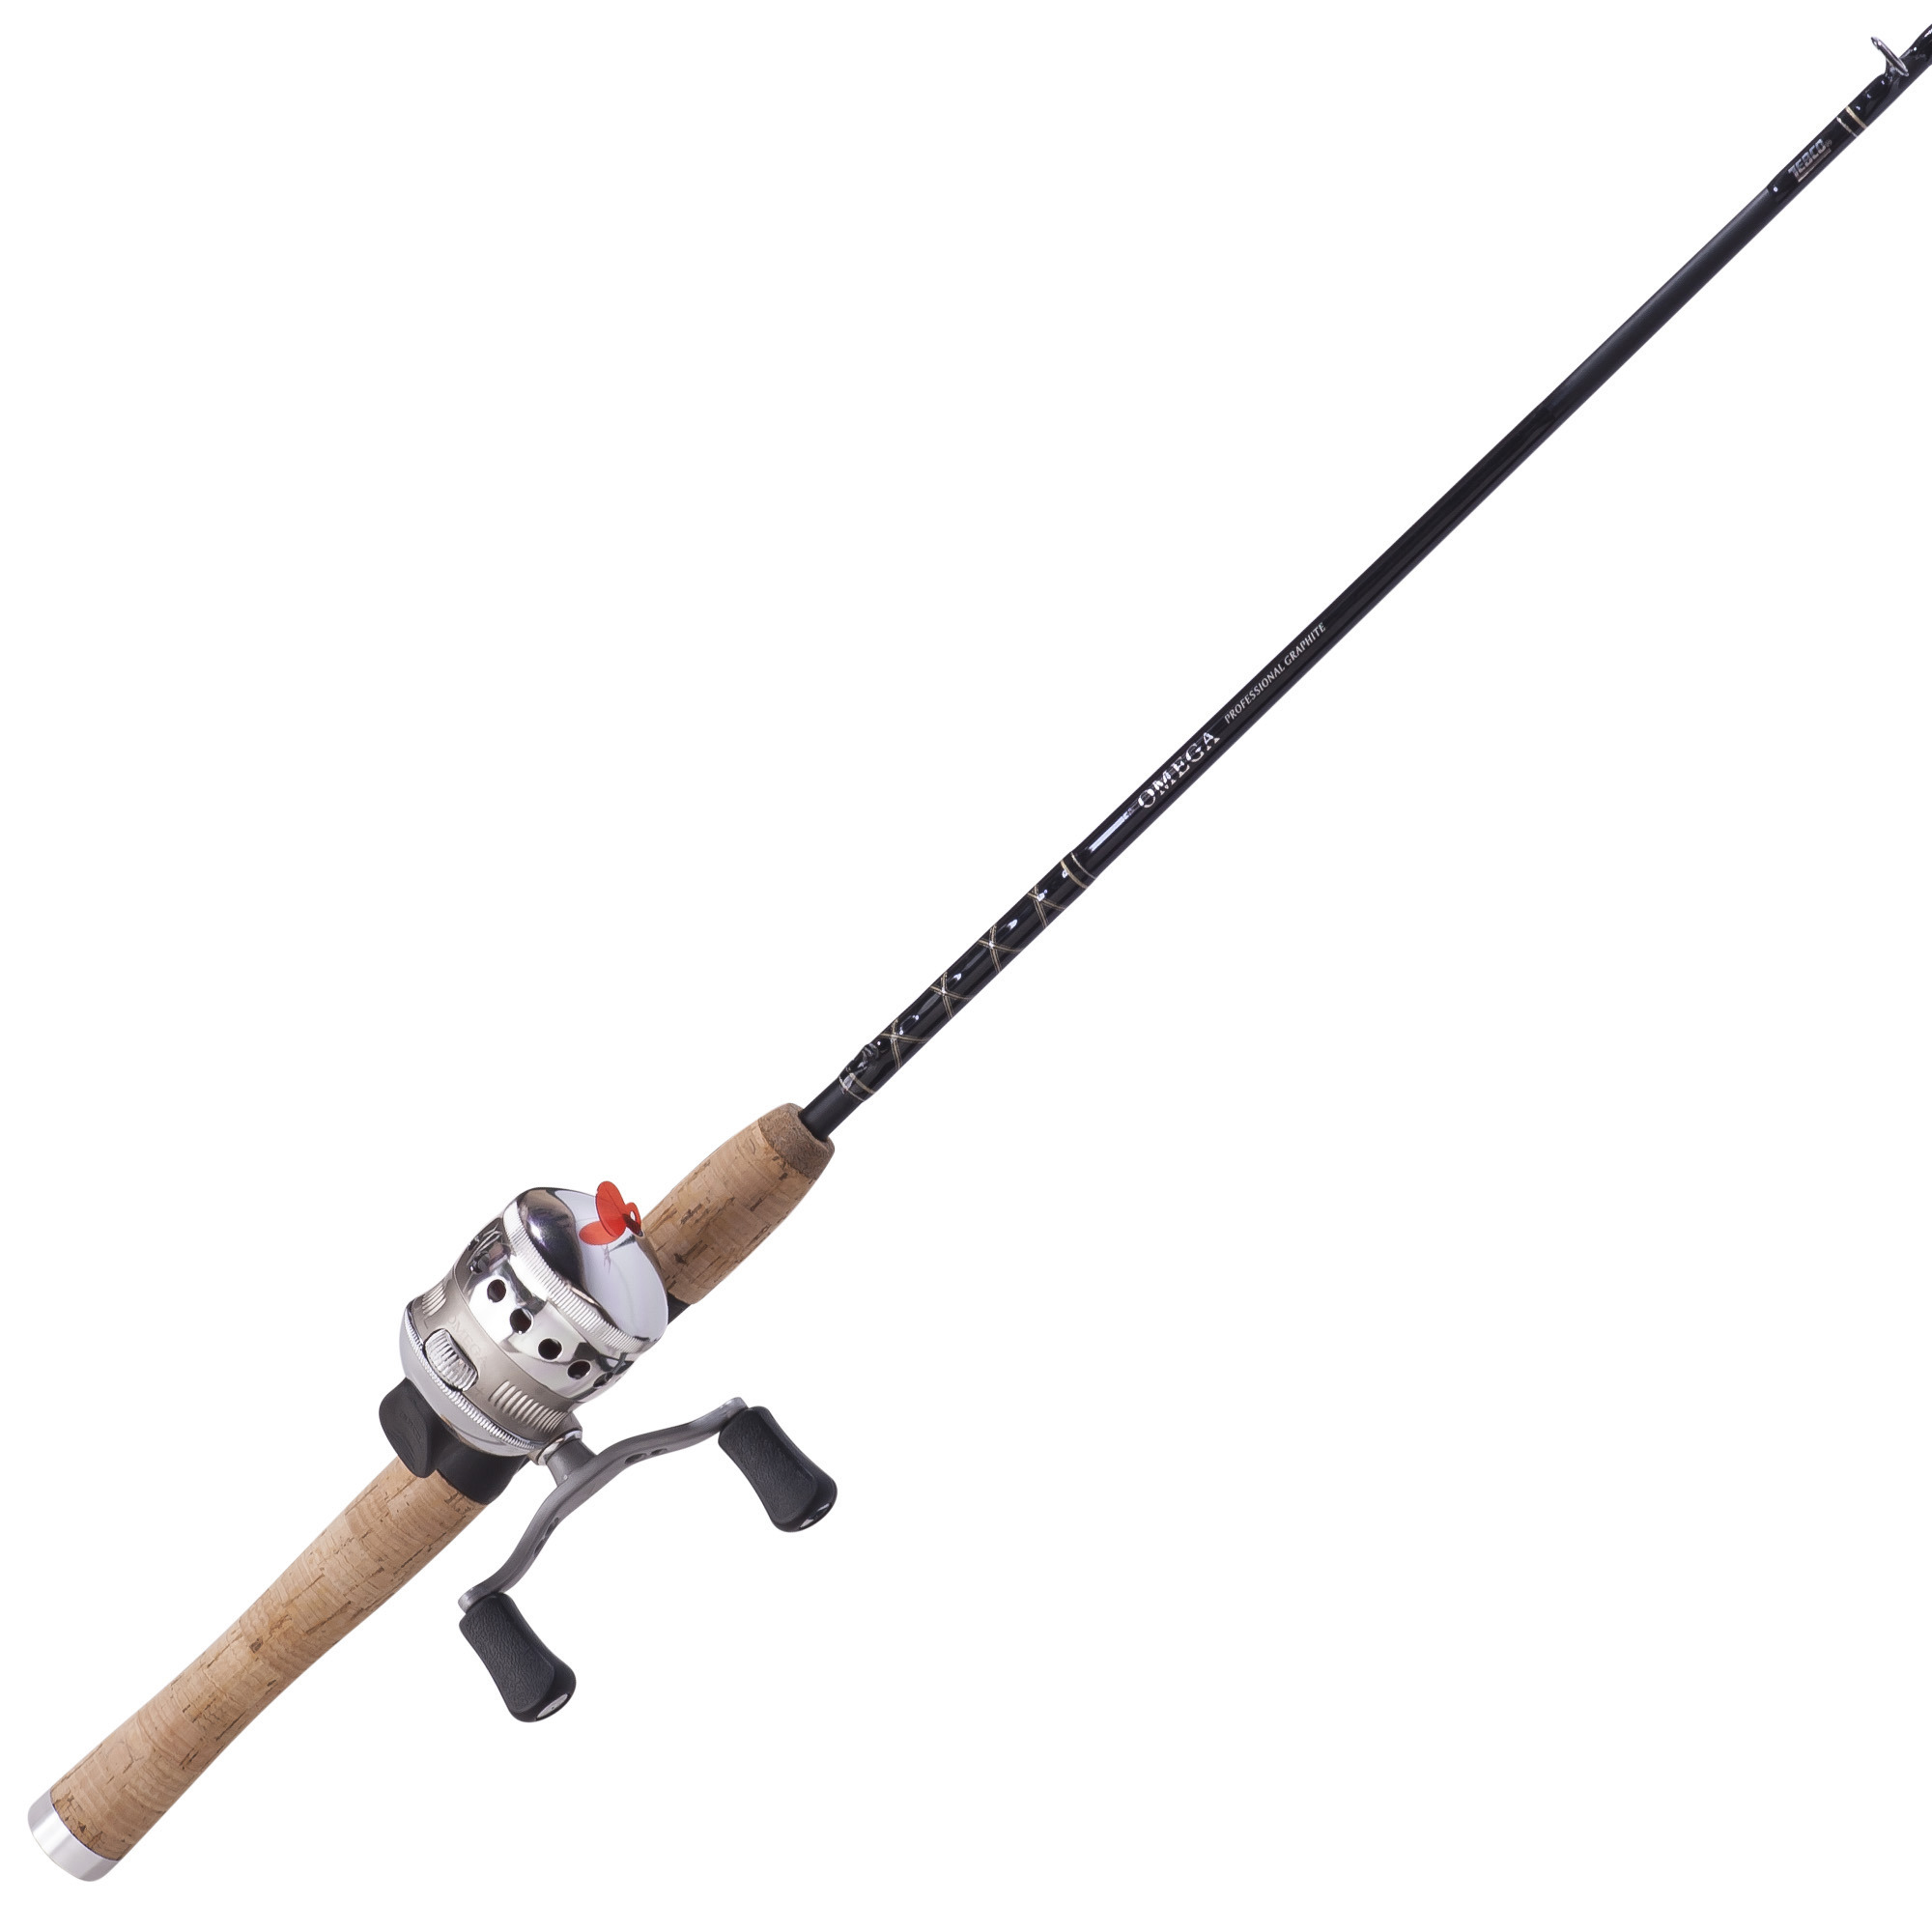 Zebco 33 Cork Spincast Reel and Fishing Rod Combo, Pre-Spooled 10